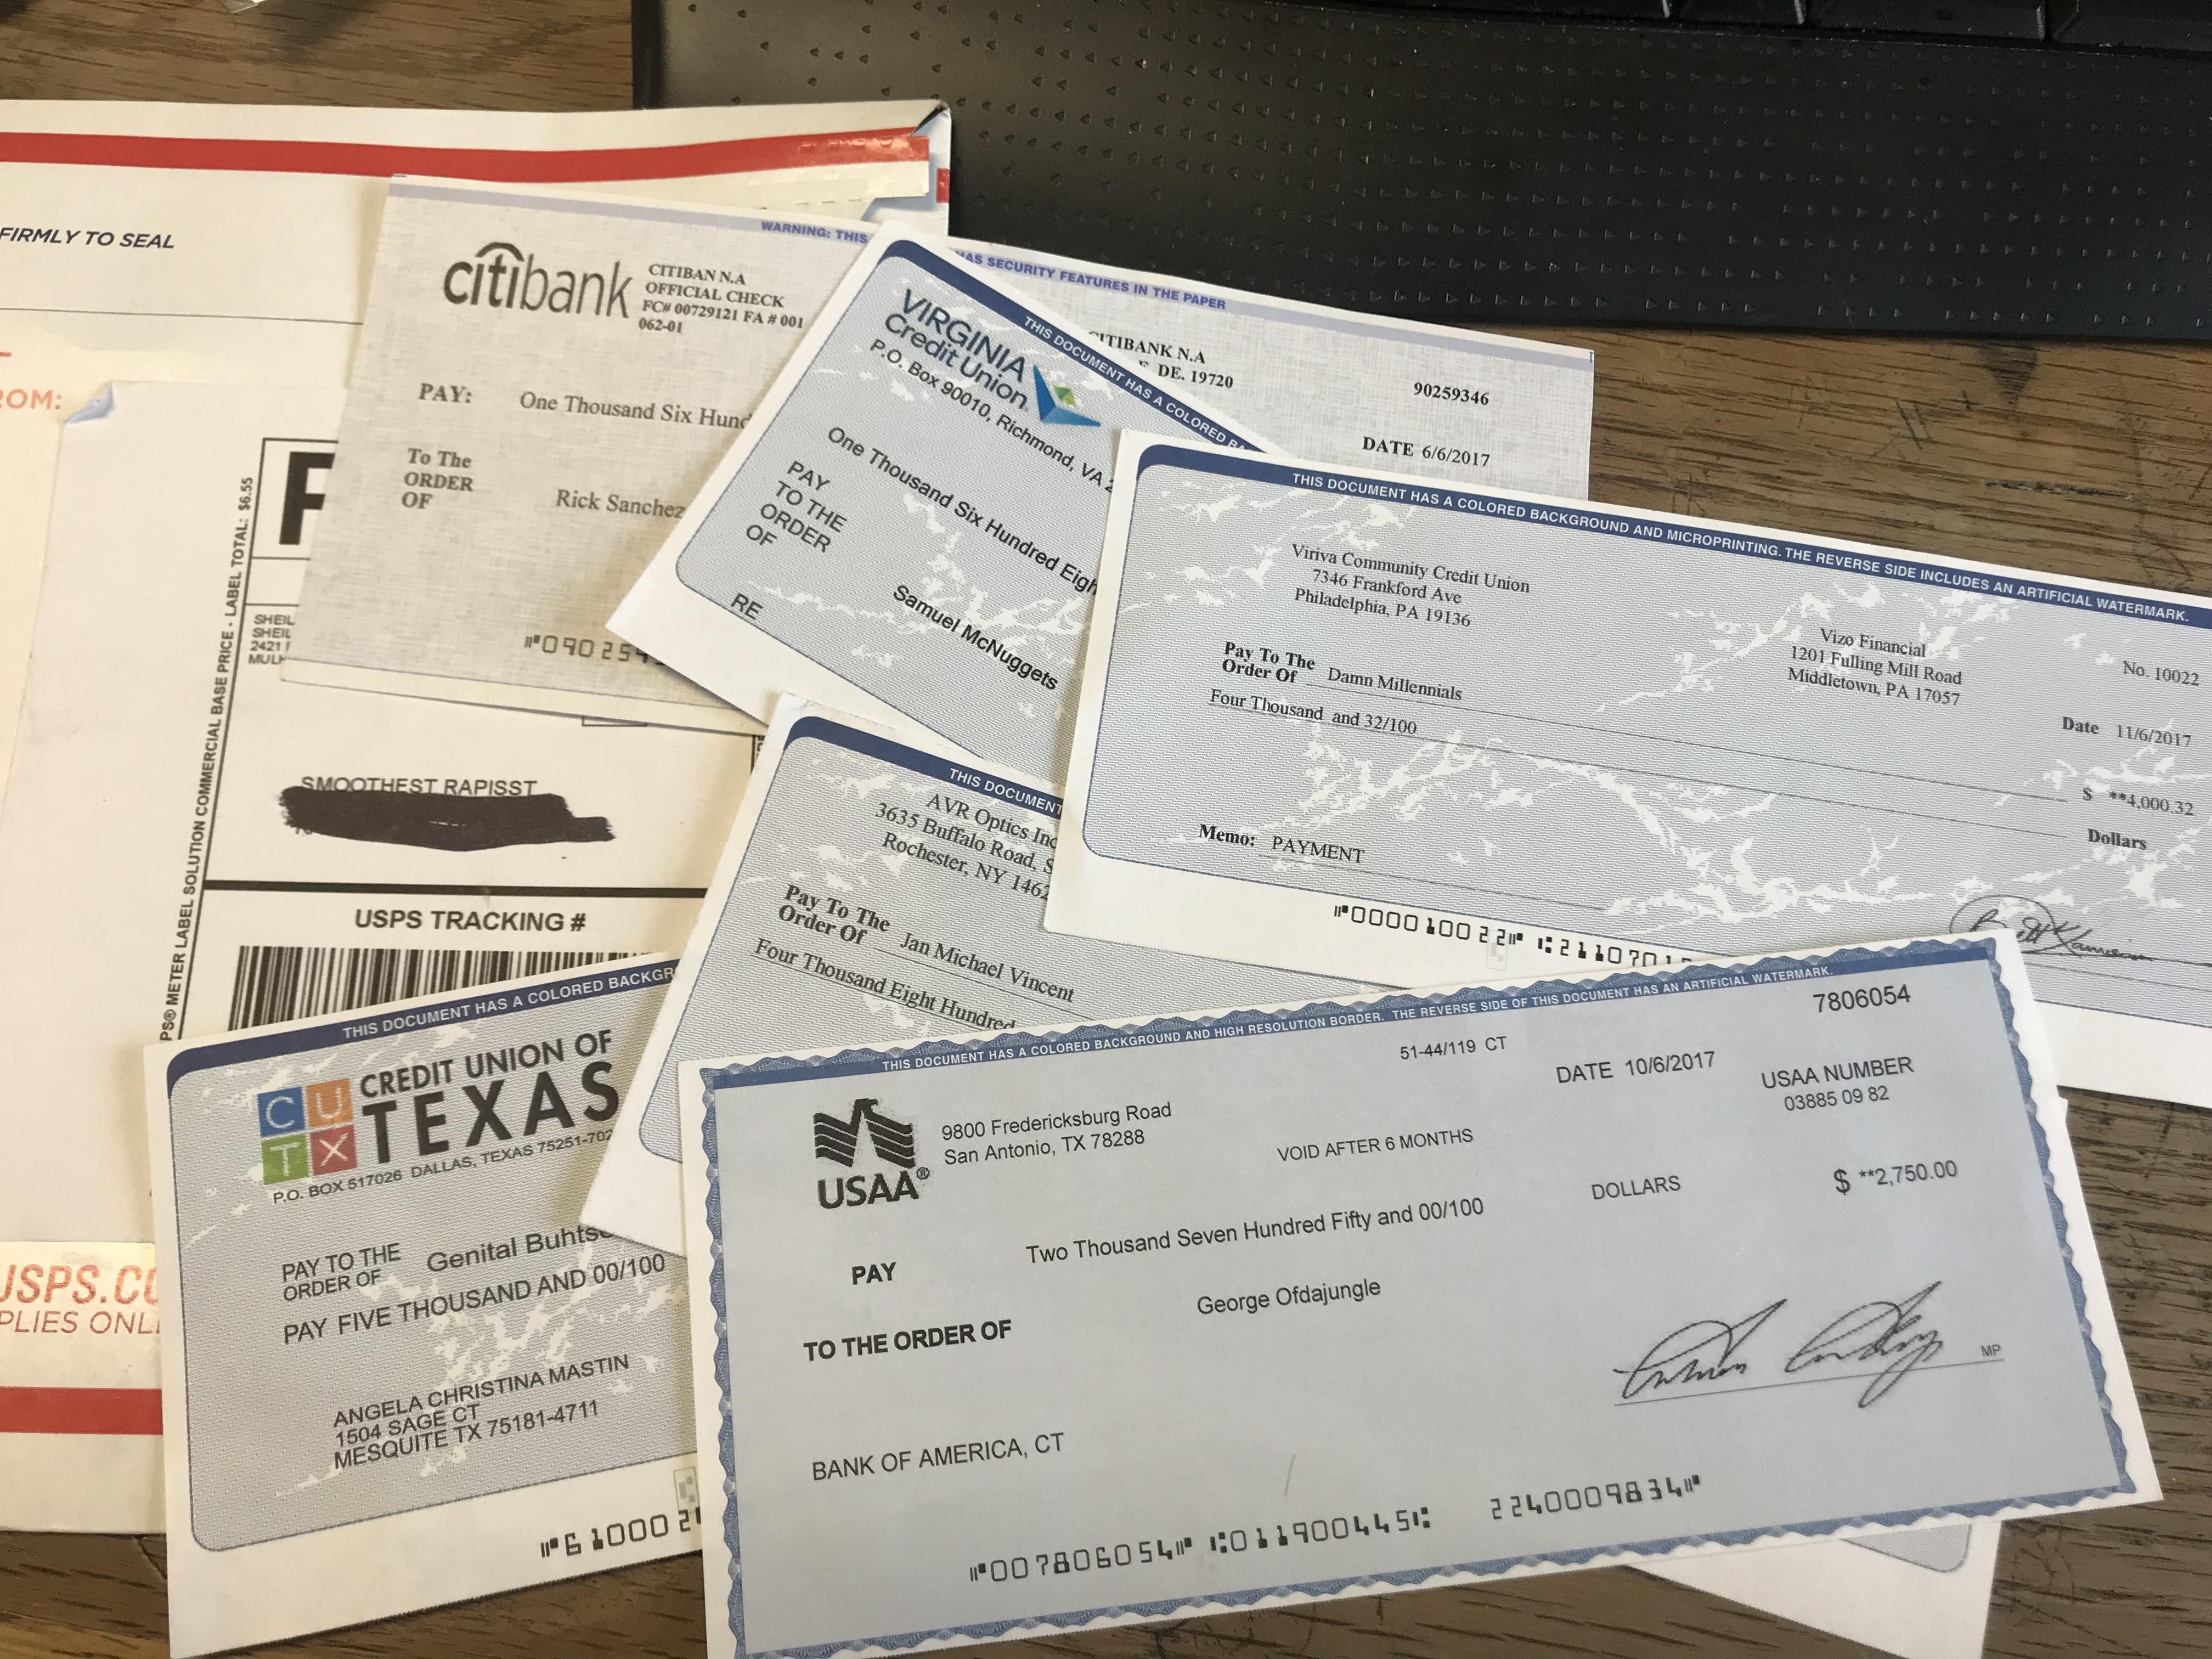 I love messing with Craigslist Scammers. They offer to purchase my items with fake checks, so I have them send me fake checks.